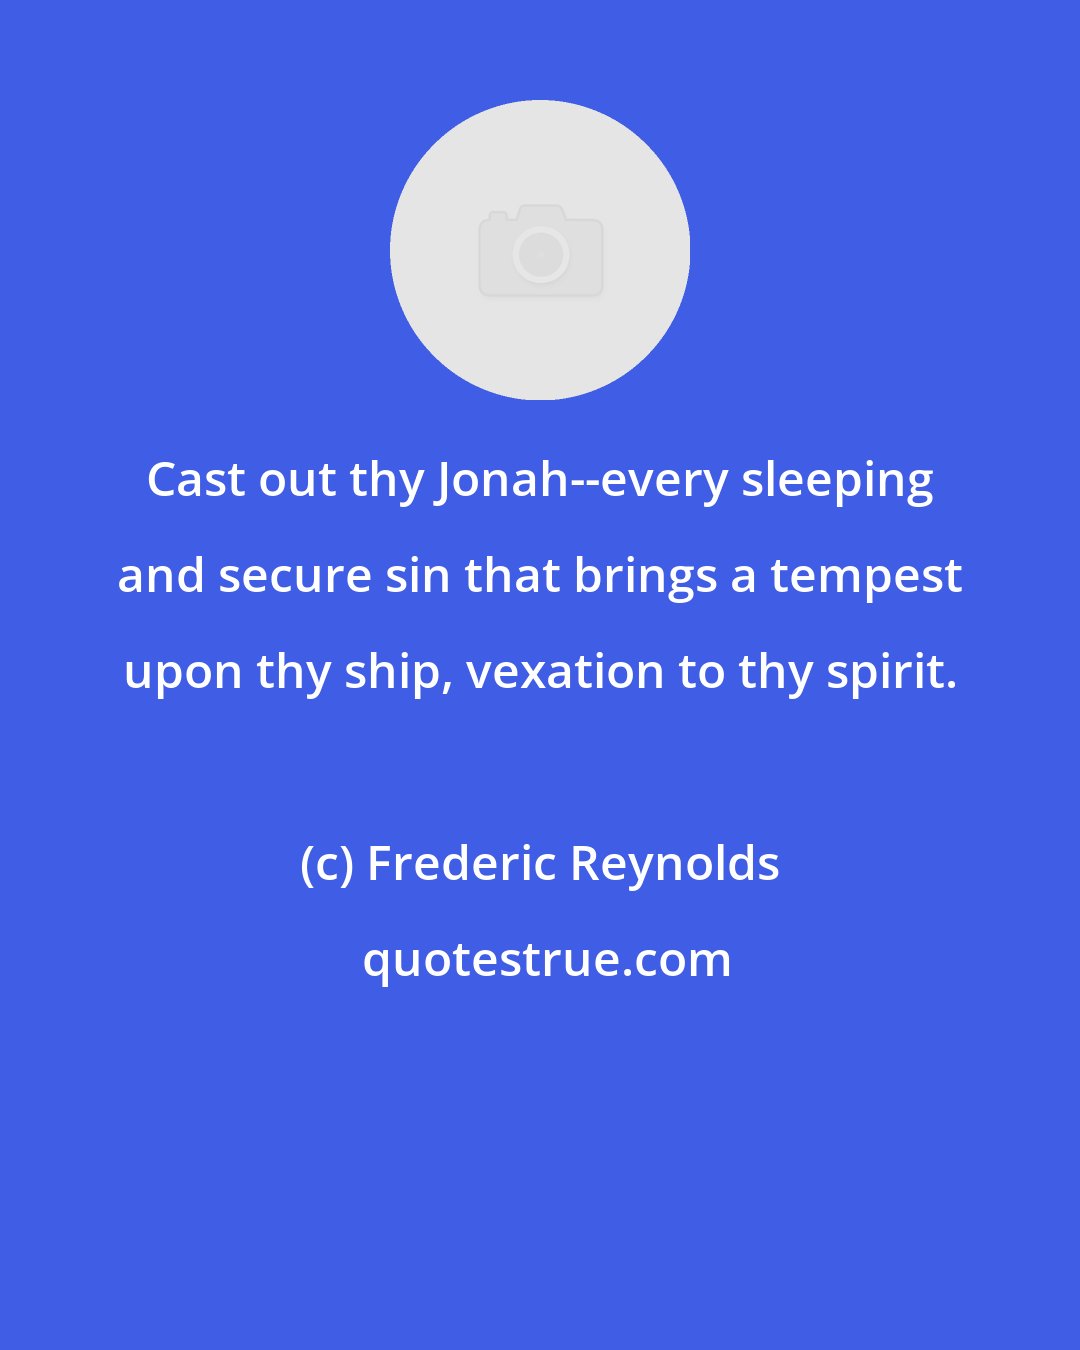 Frederic Reynolds: Cast out thy Jonah--every sleeping and secure sin that brings a tempest upon thy ship, vexation to thy spirit.